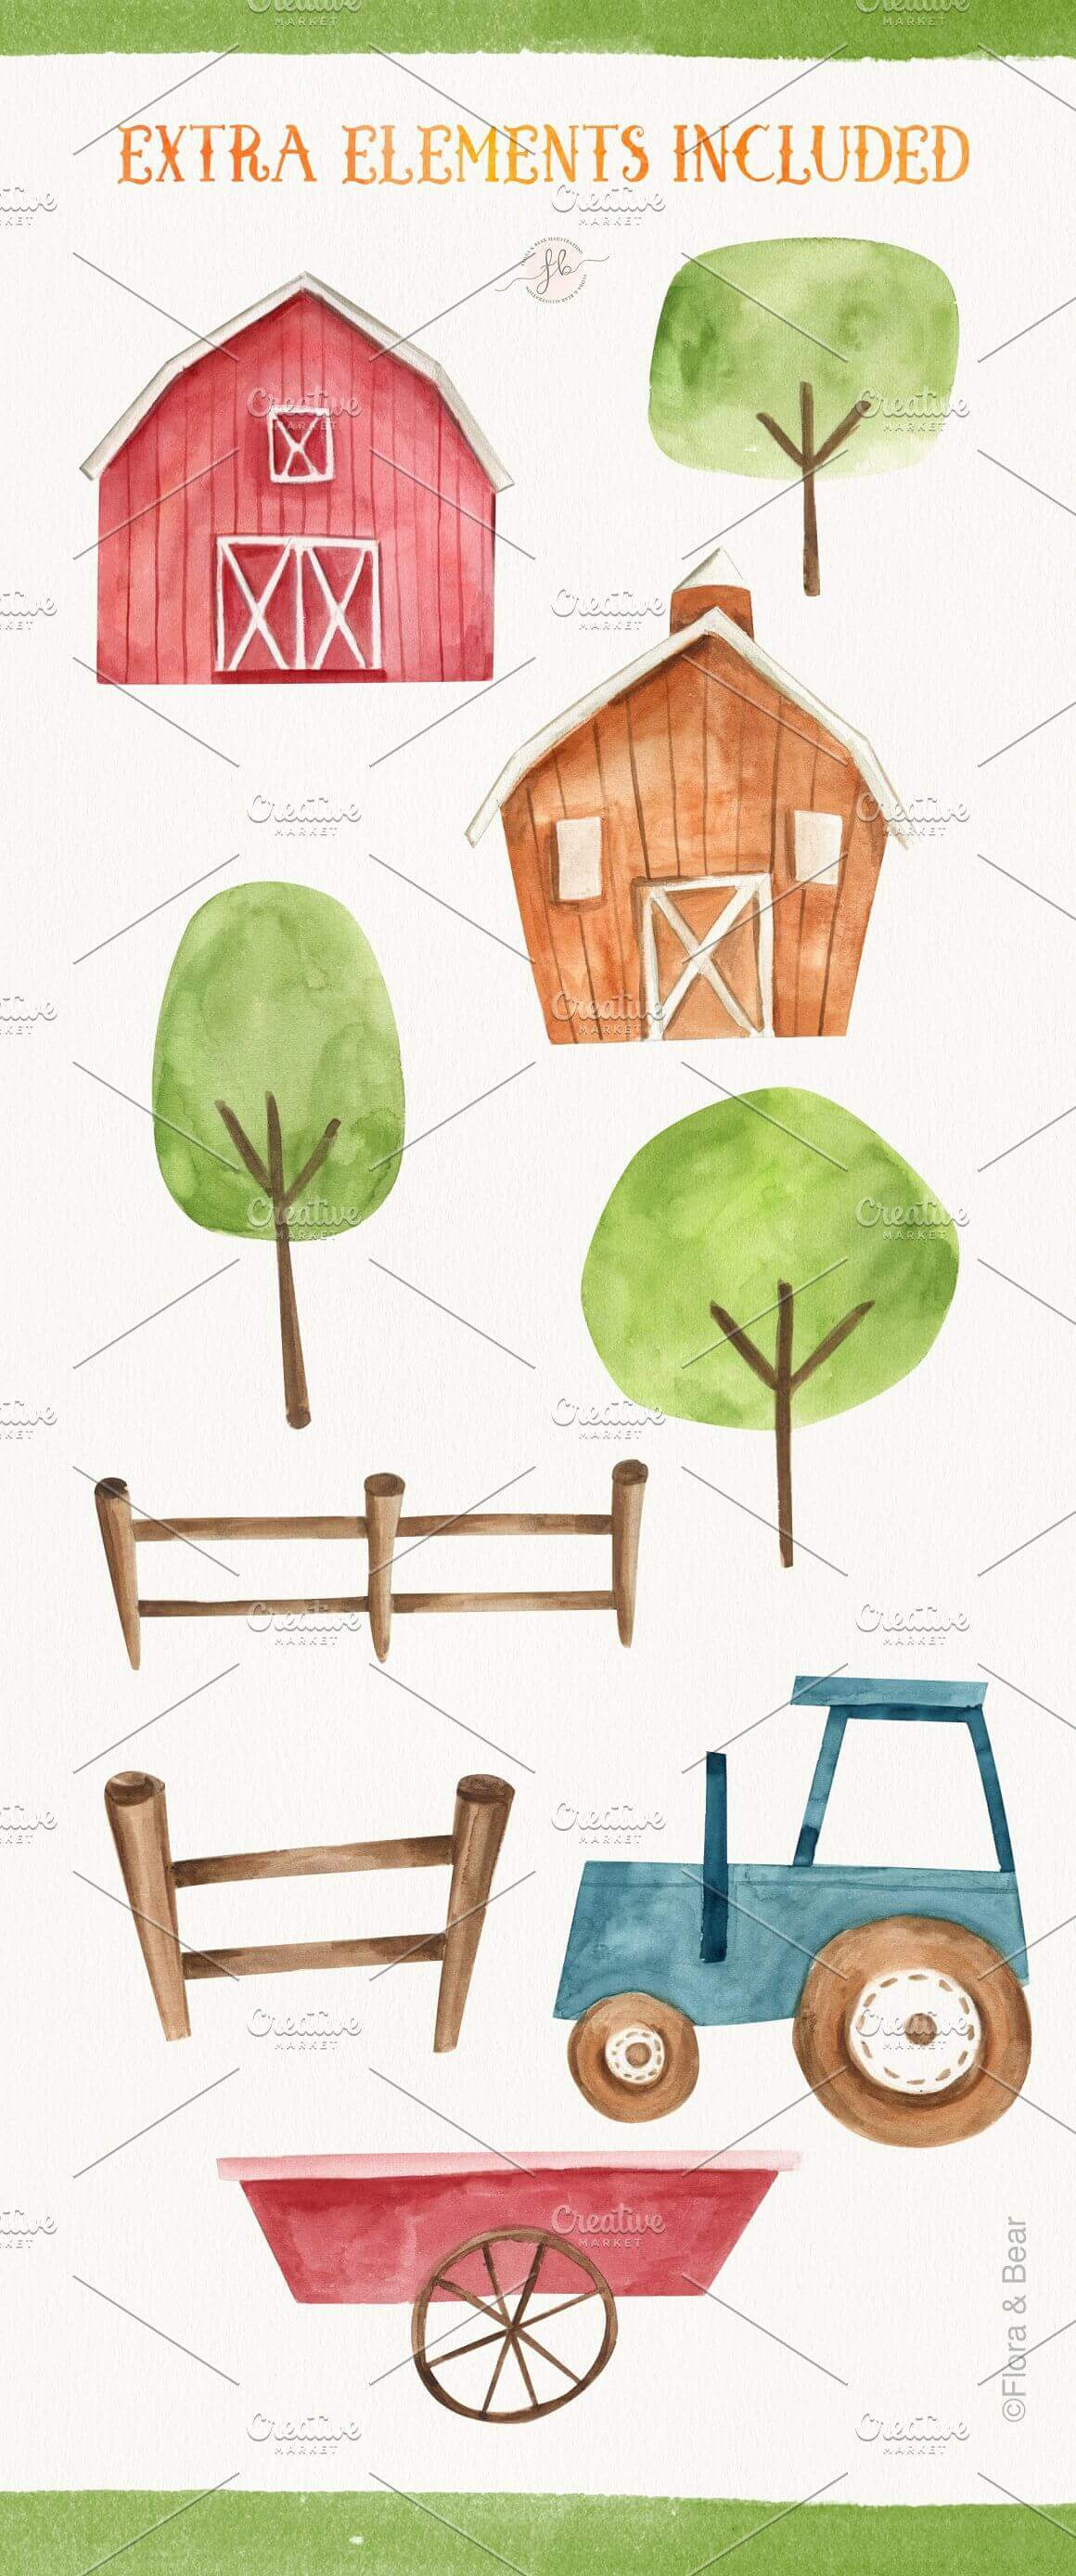 Extra elements included: trees, sheds, fences, carts, tractor.